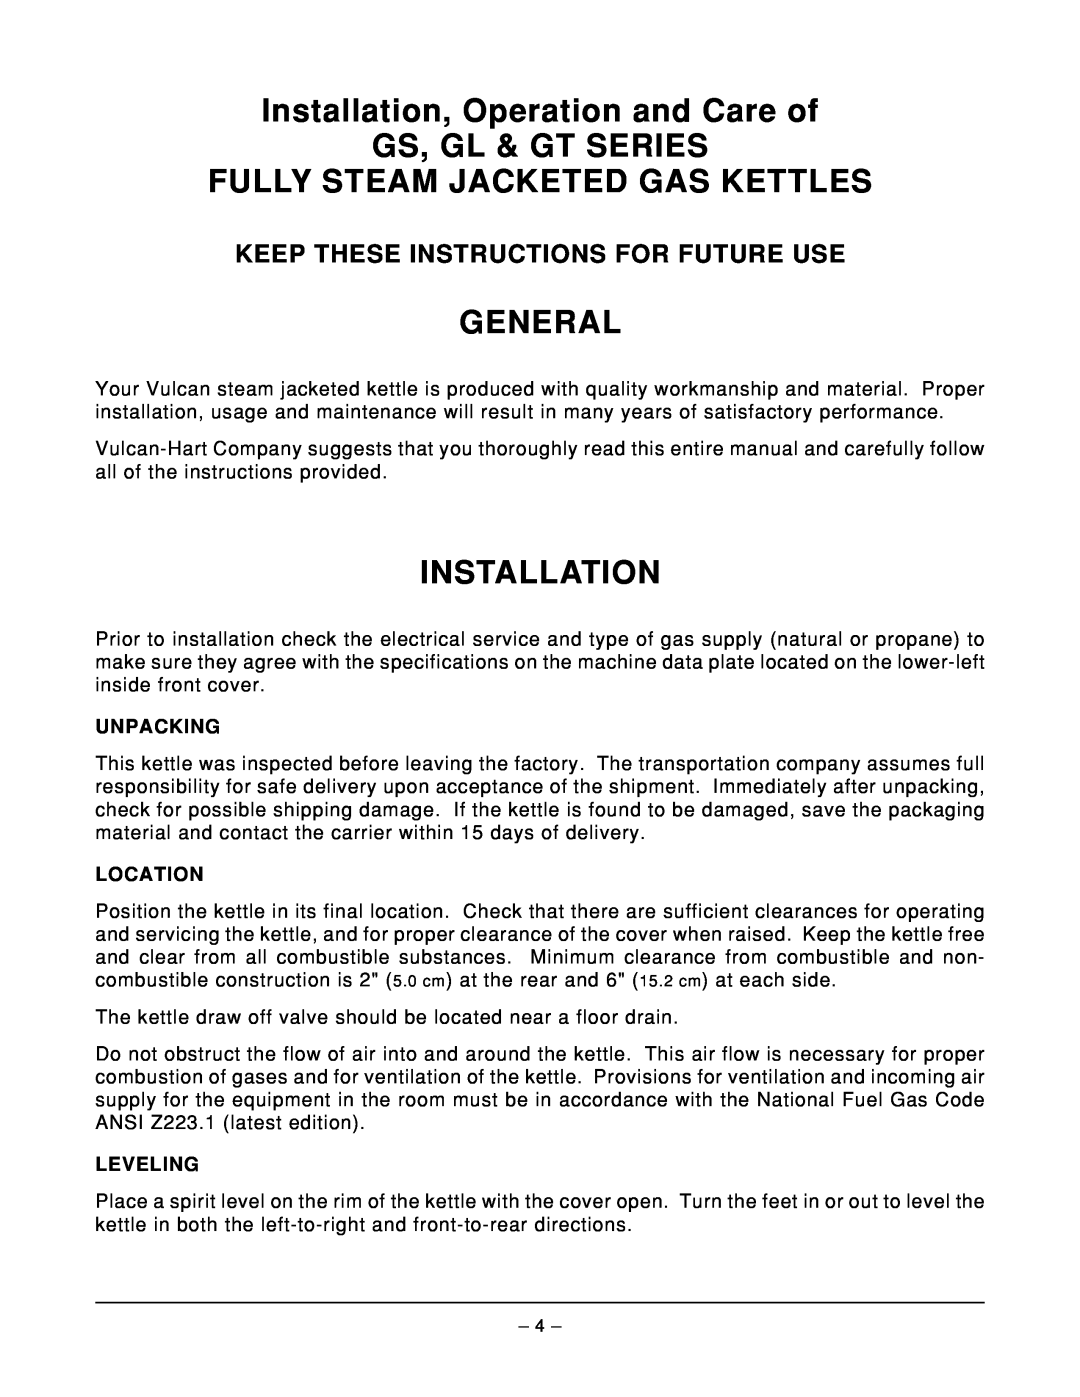 Vulcan-Hart ML-52640 Installation, Operation and Care of GS, GL & GT SERIES, Fully Steam Jacketed Gas Kettles, General 